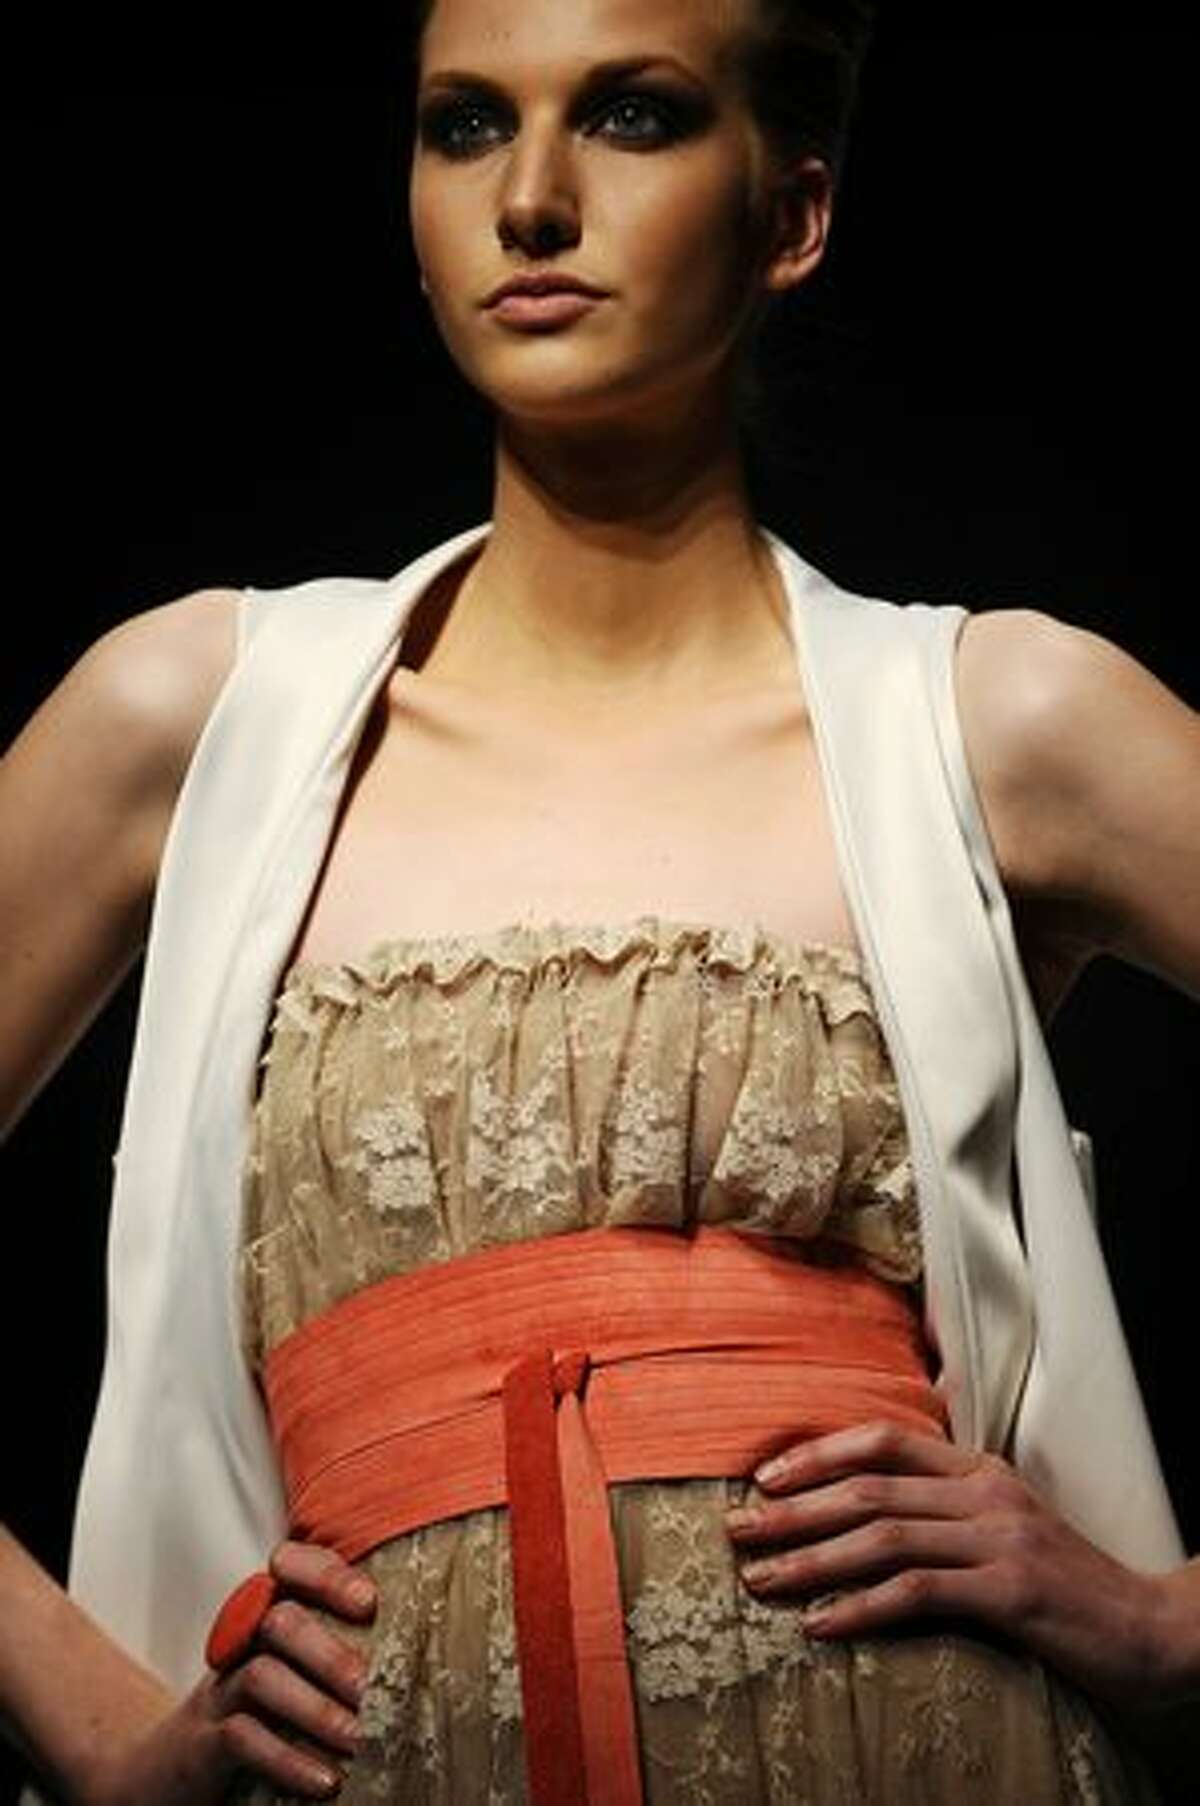 A model showcases a creation by designer "Michelle Ludek" on August 12, 2010 during the Cape Town fashion week at the Cape Town International Convention Center in Cape Town, South Africa.